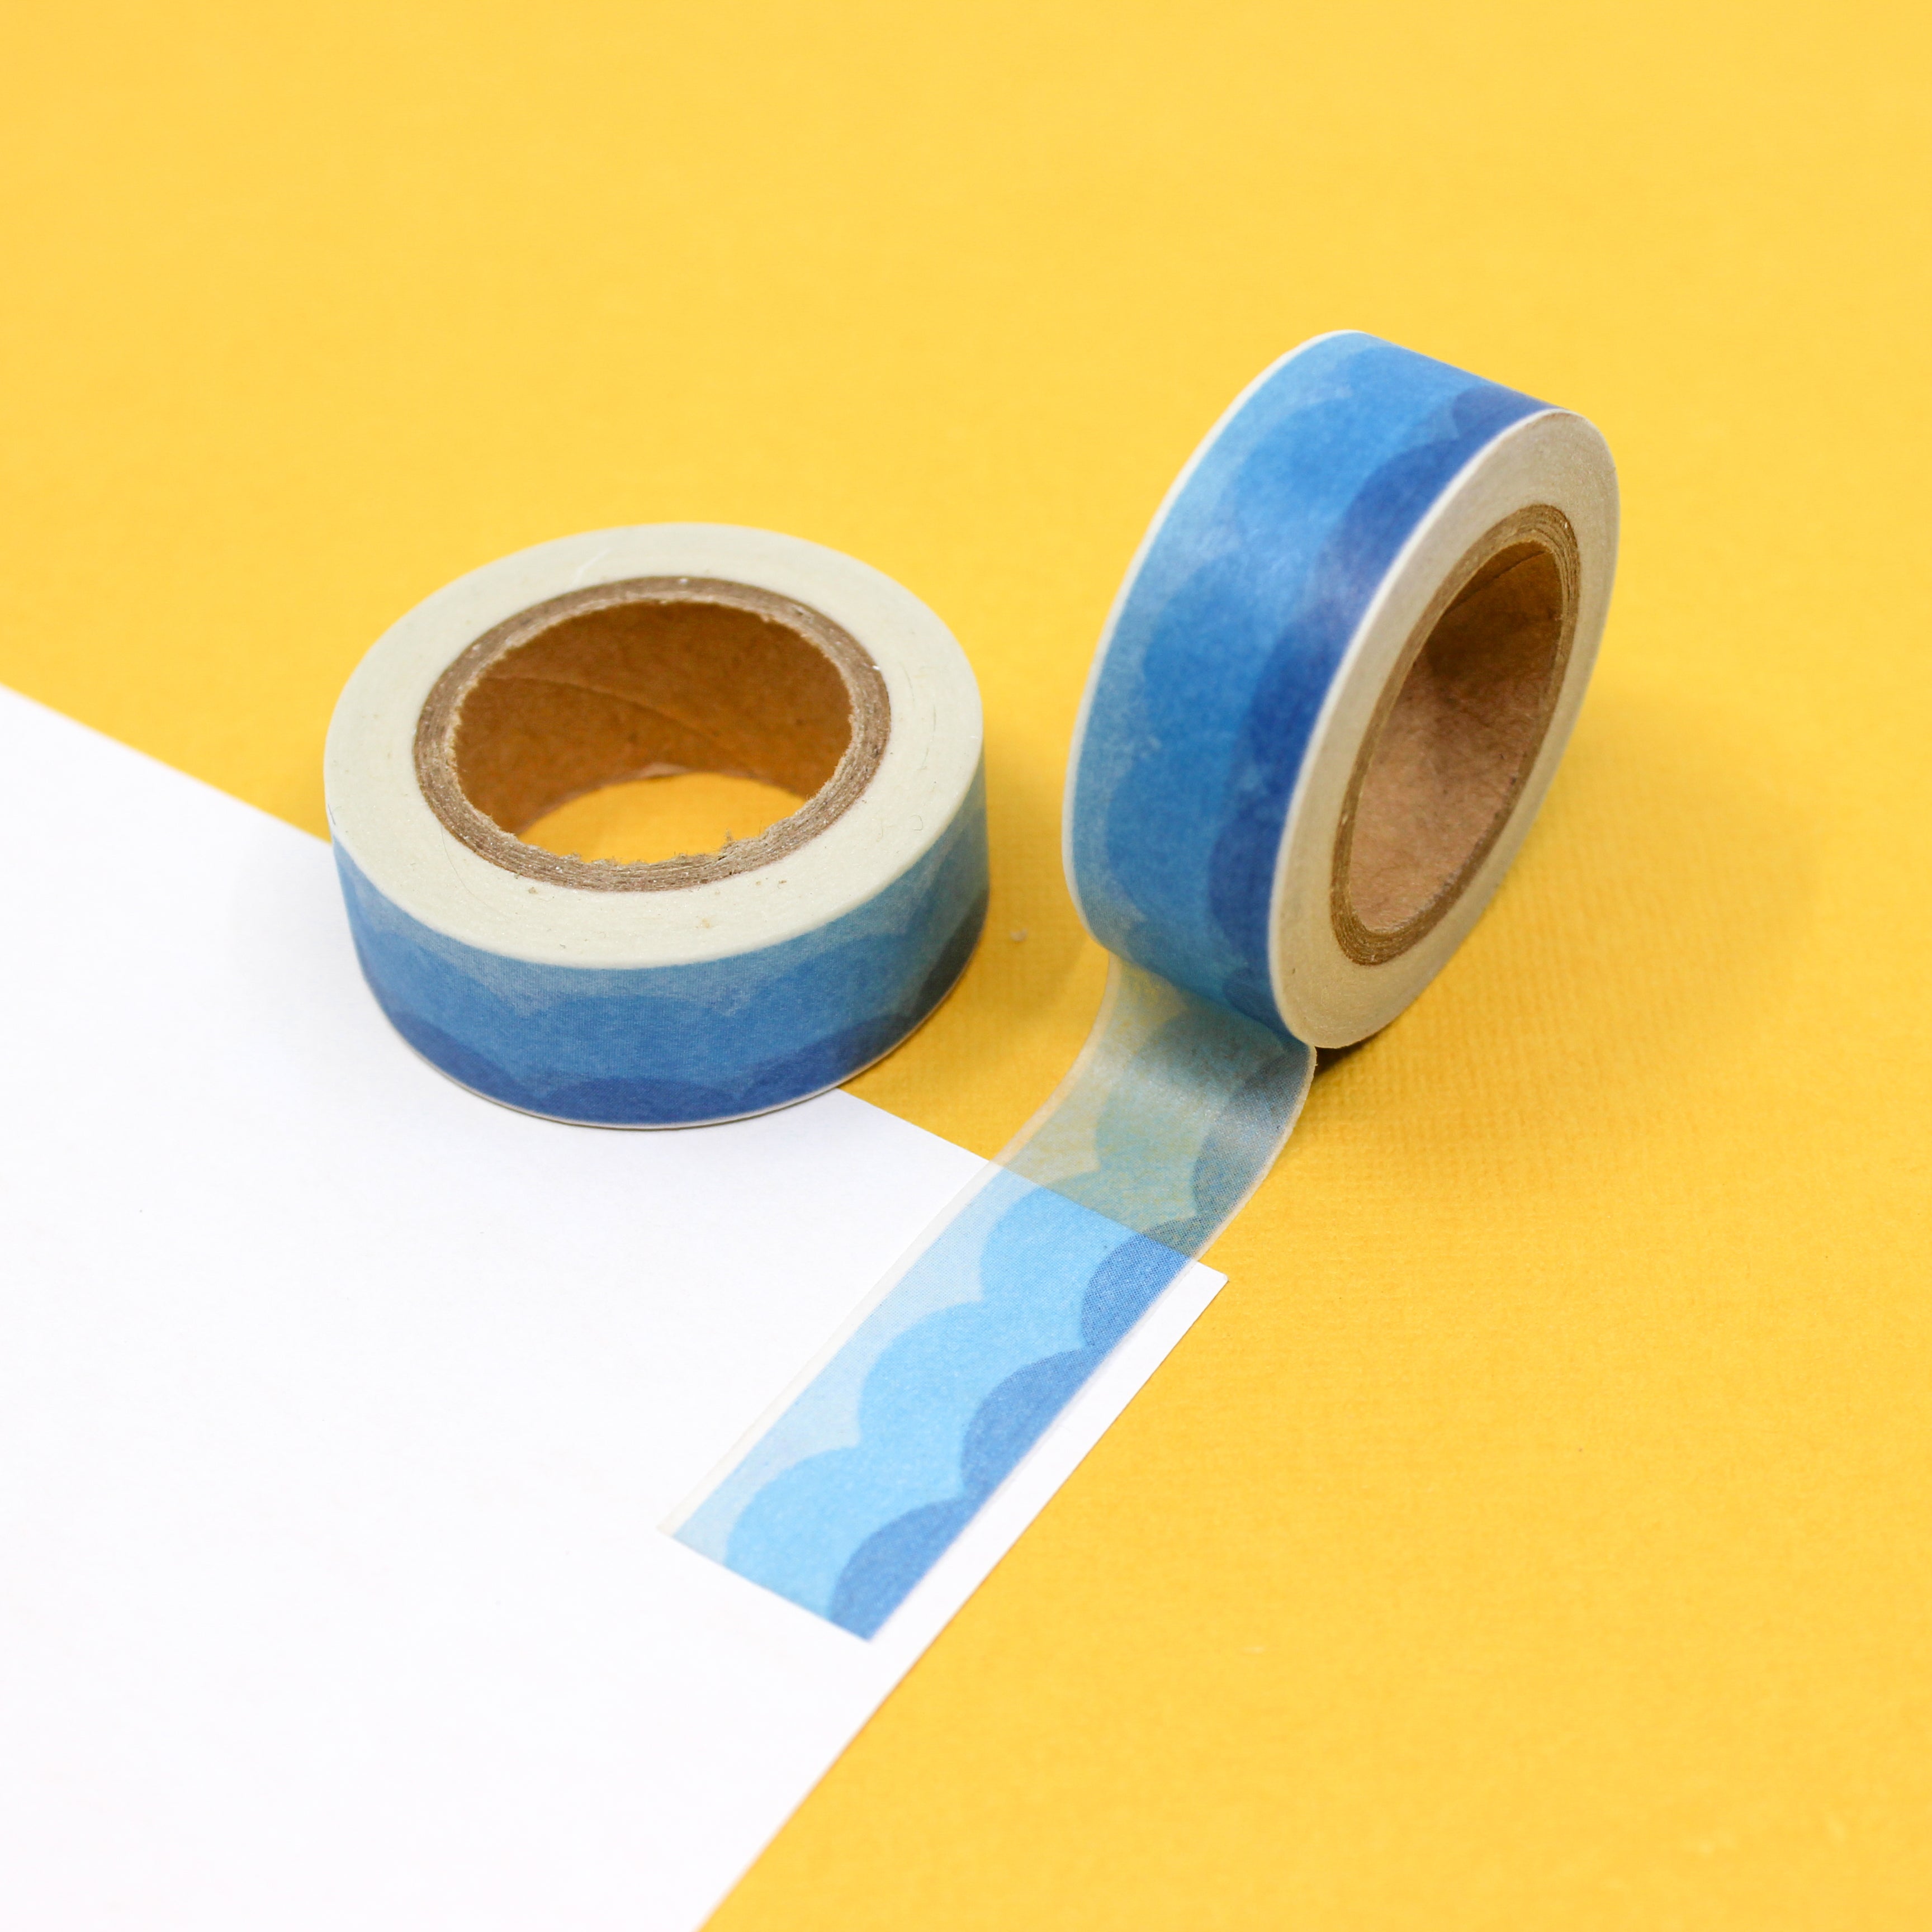 This is a blue ocean wave or cloud pattern Washi Tape from BBB Supplies Craft Shop